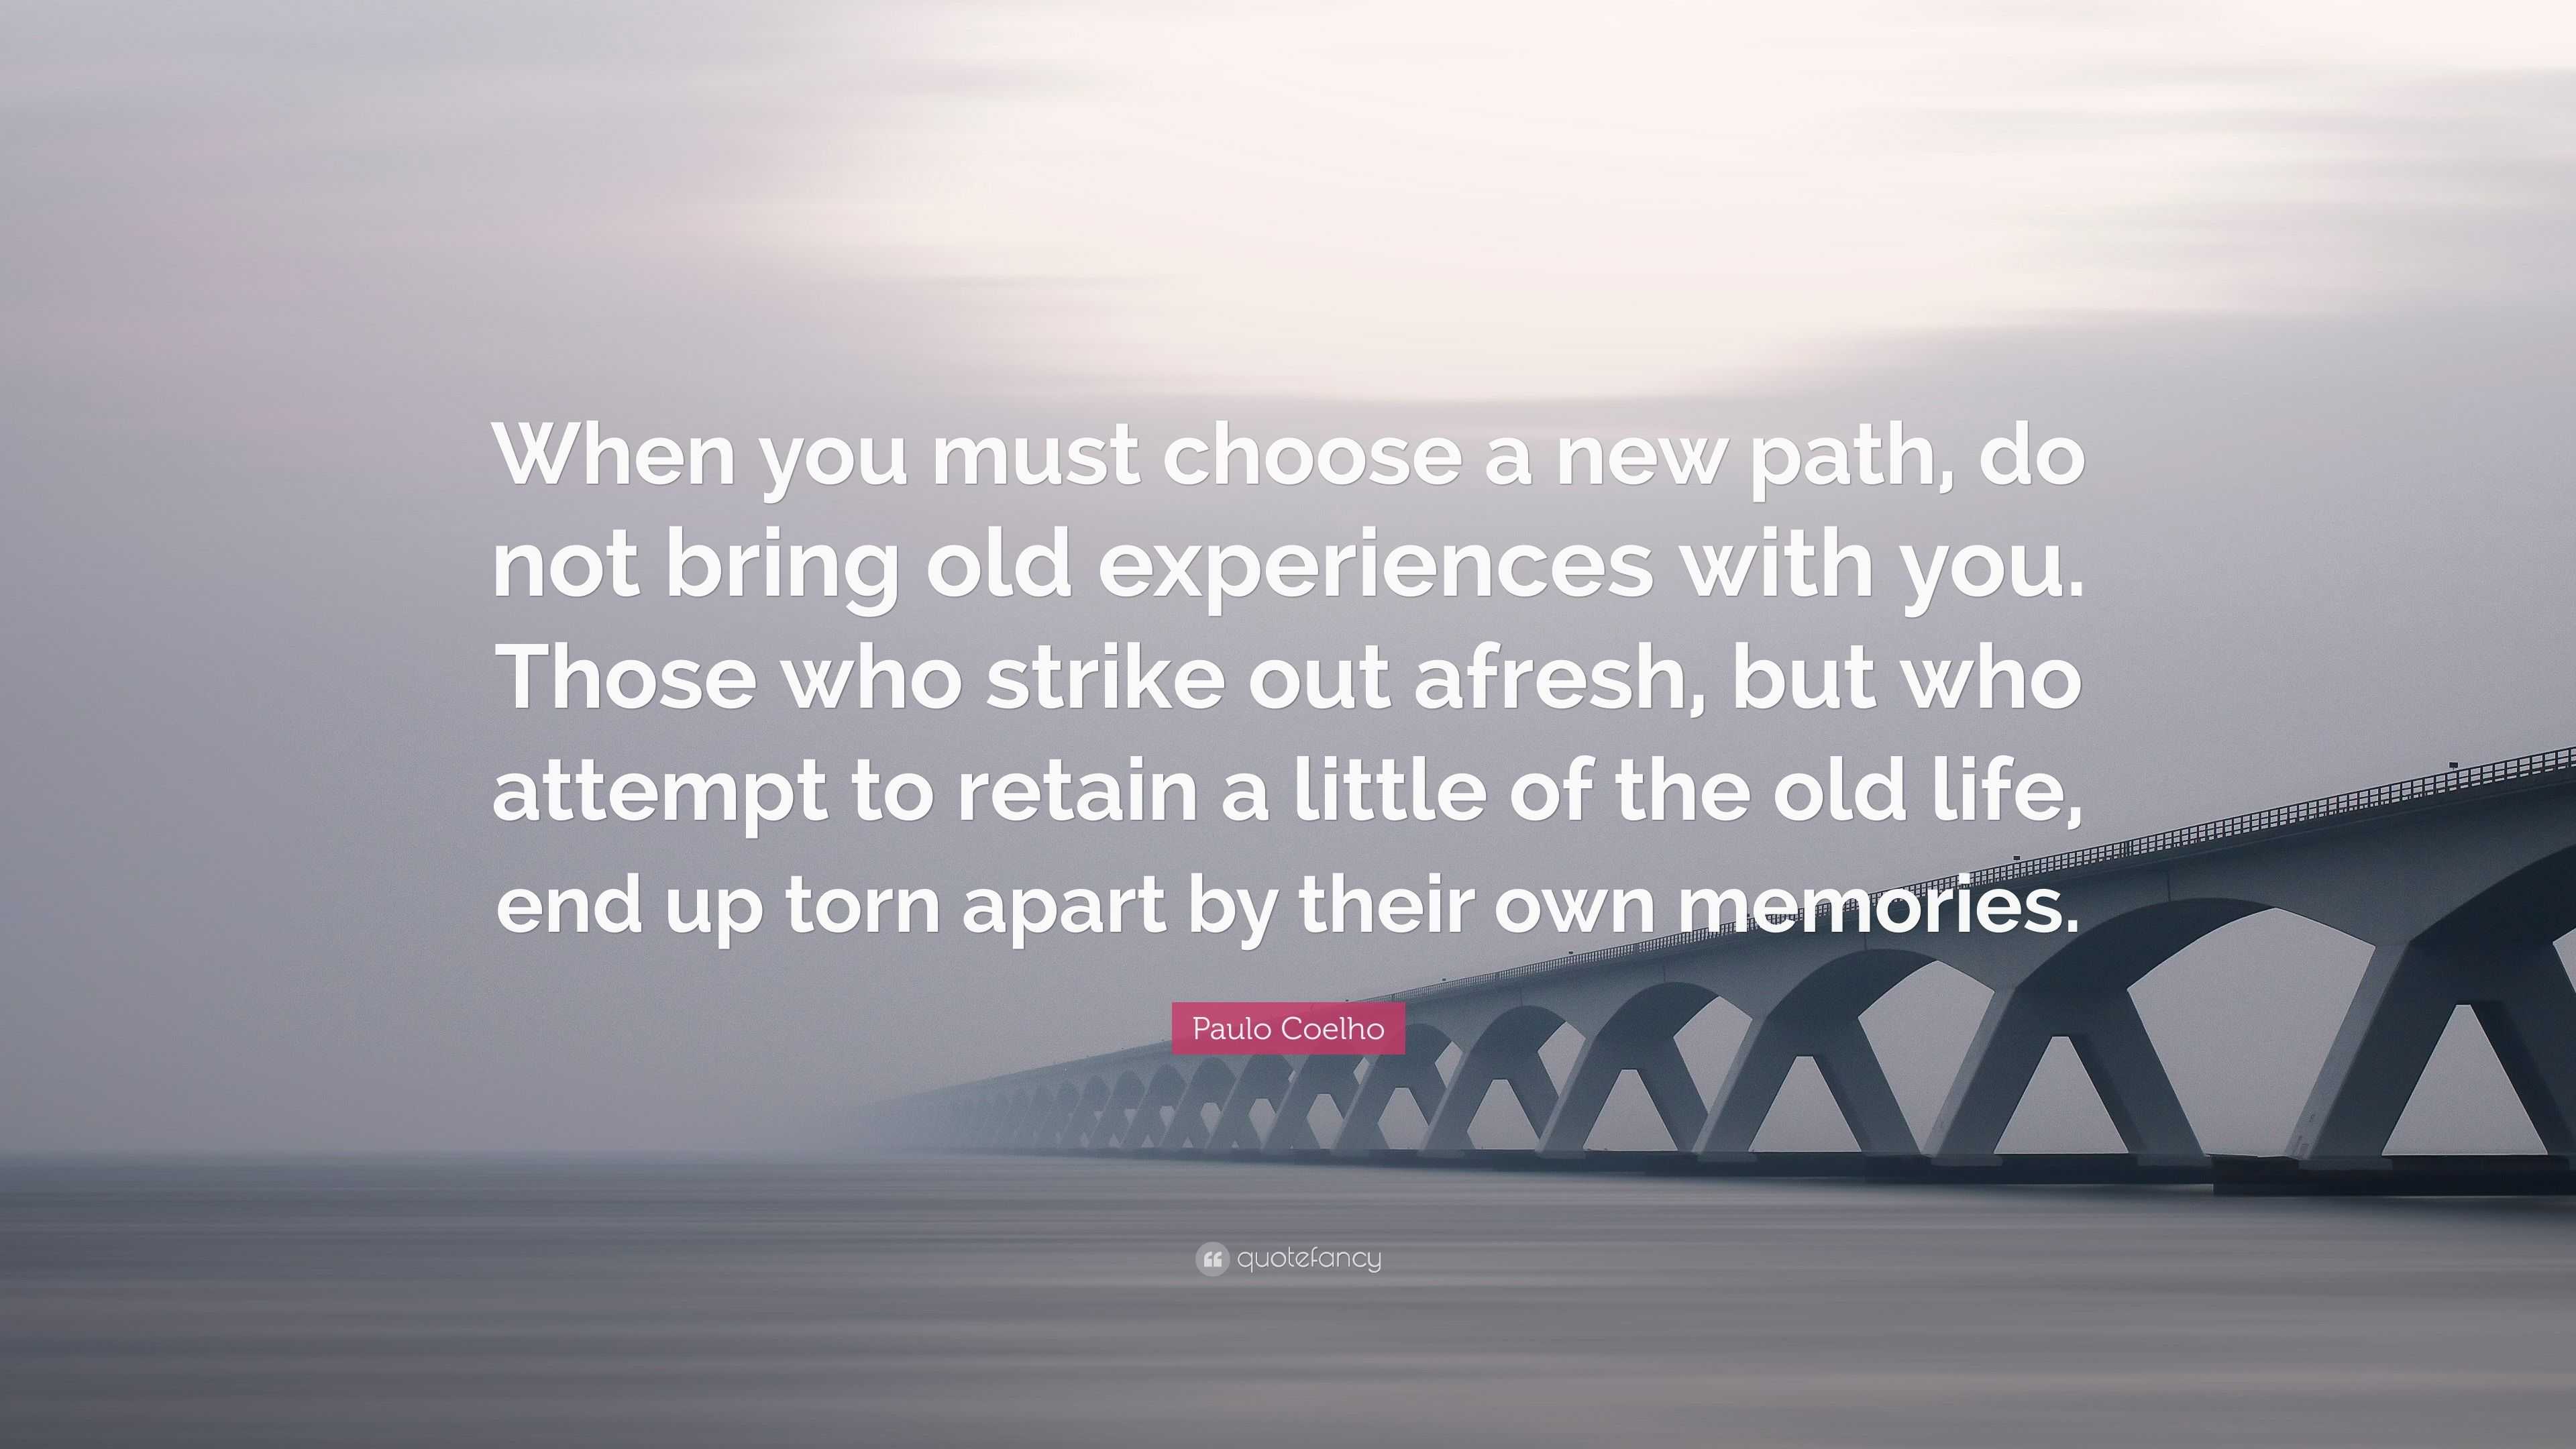 Paulo Coelho Quote “When you must choose a new path do not bring